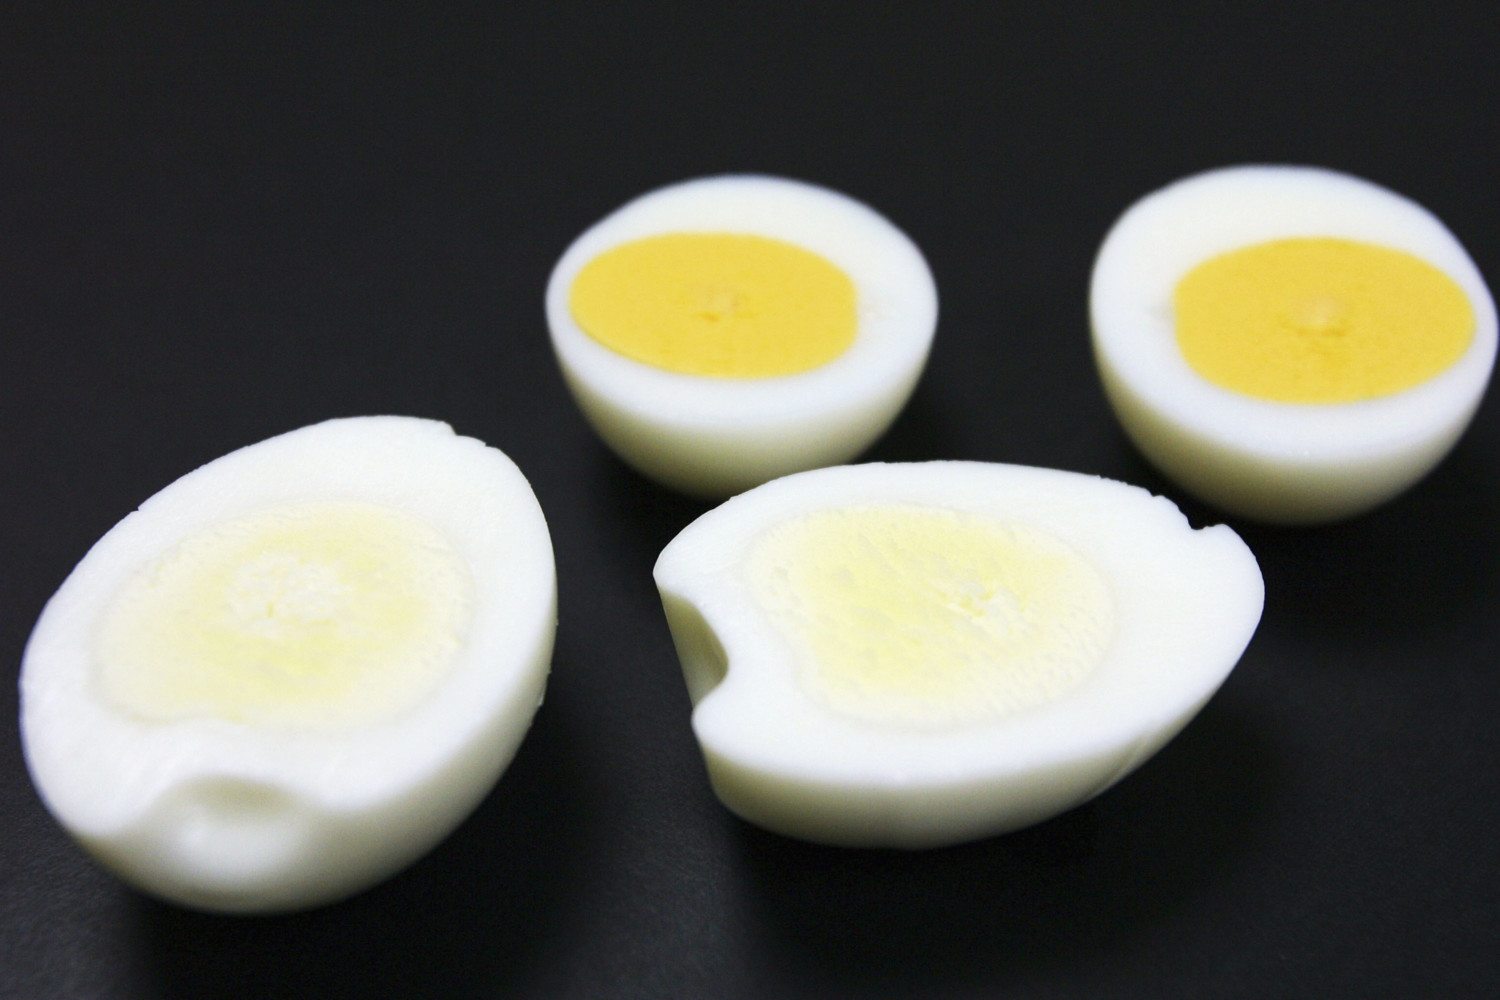 Japanese Company Develops Eggs With Whiter Yolks